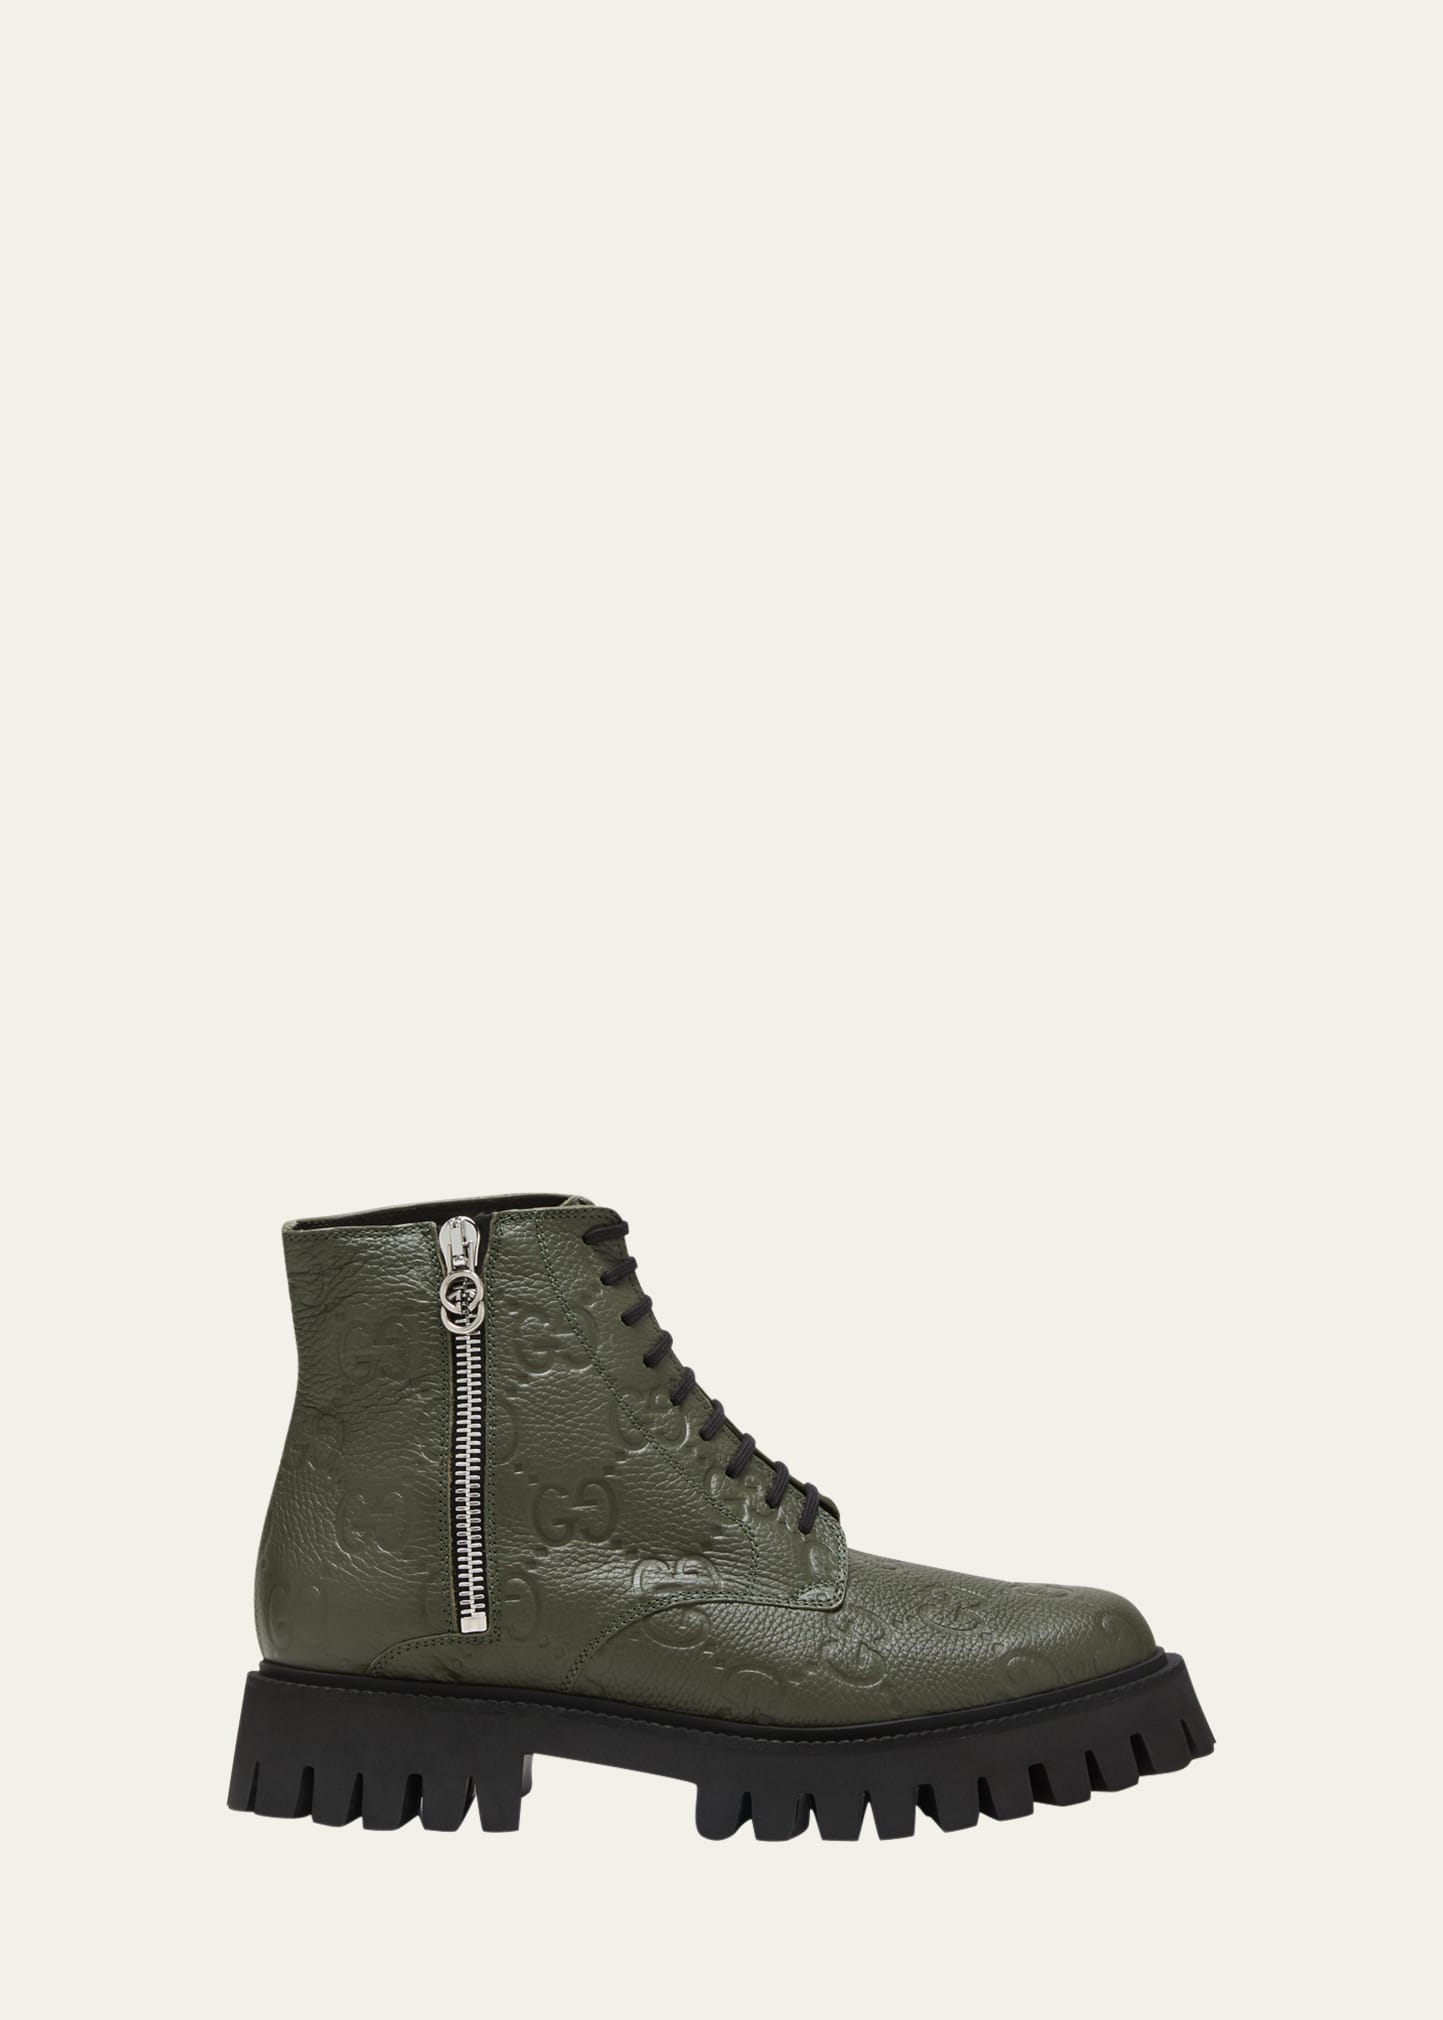 Gucci Men's Novo Gg Leather Lug Sole Lace-up Boots In Dk Vintage Olive